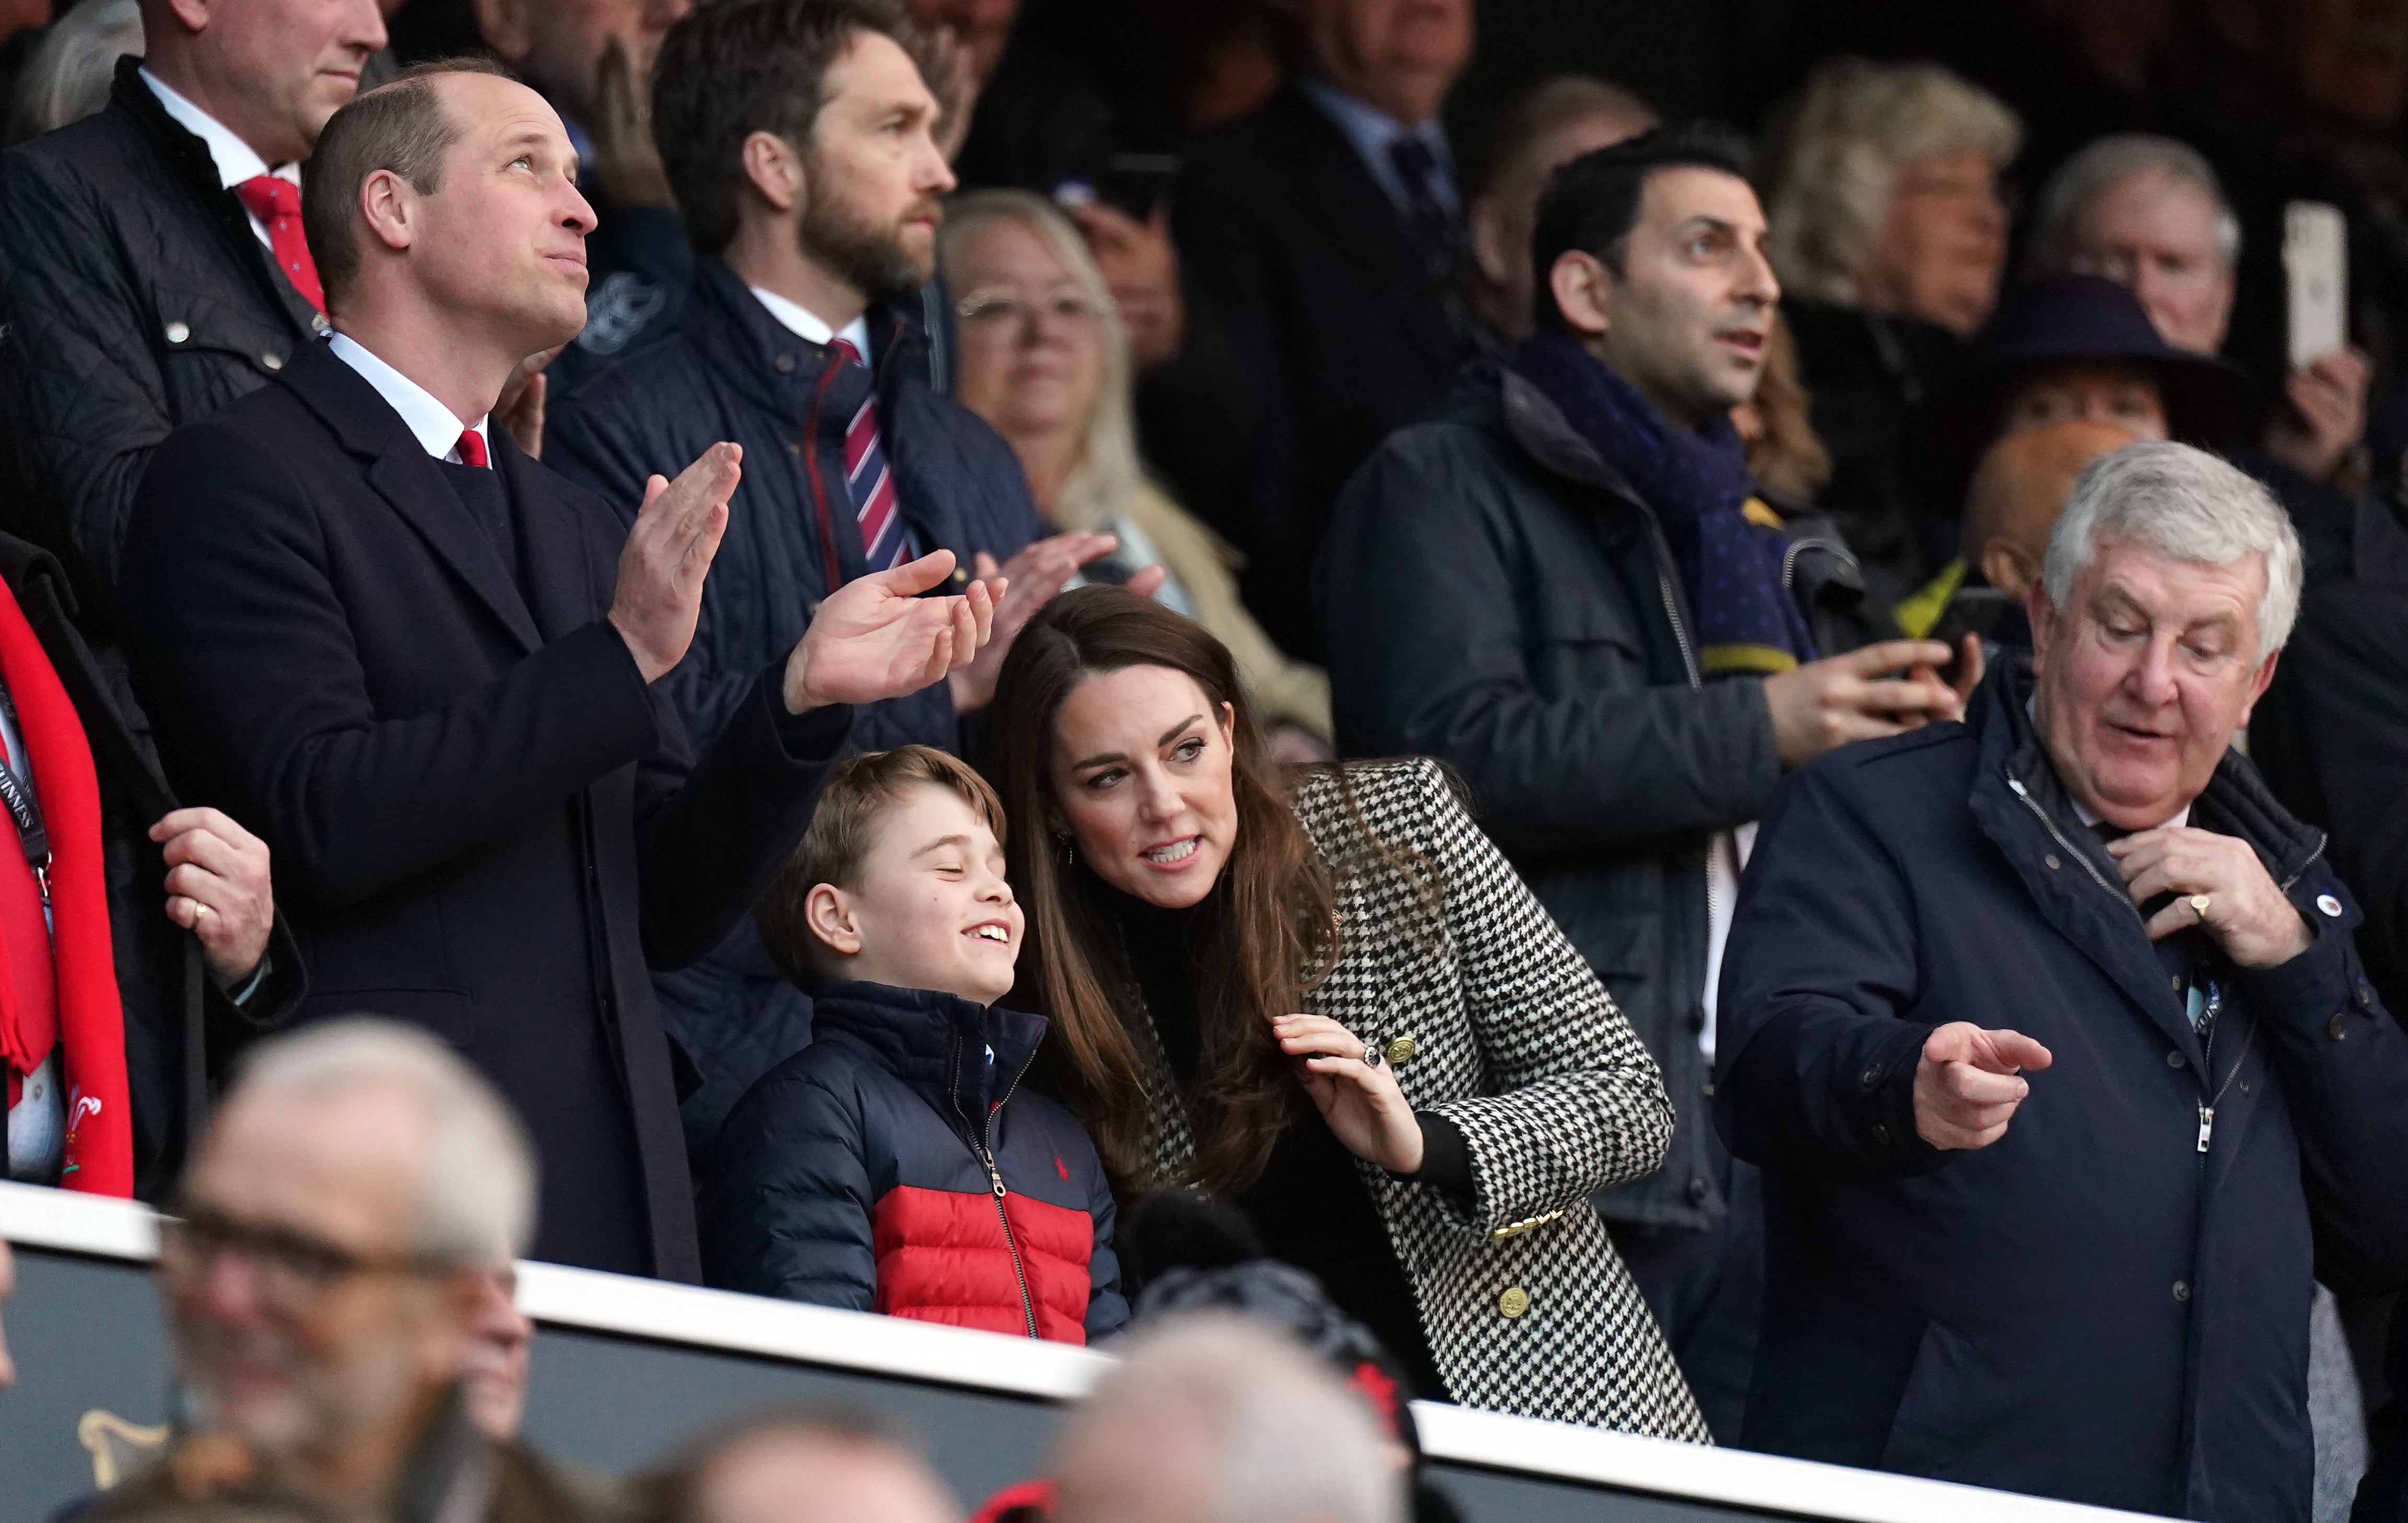 The Duke and Duchess of Cambridge and Prince George in the stands (Mike Egerton/PA)